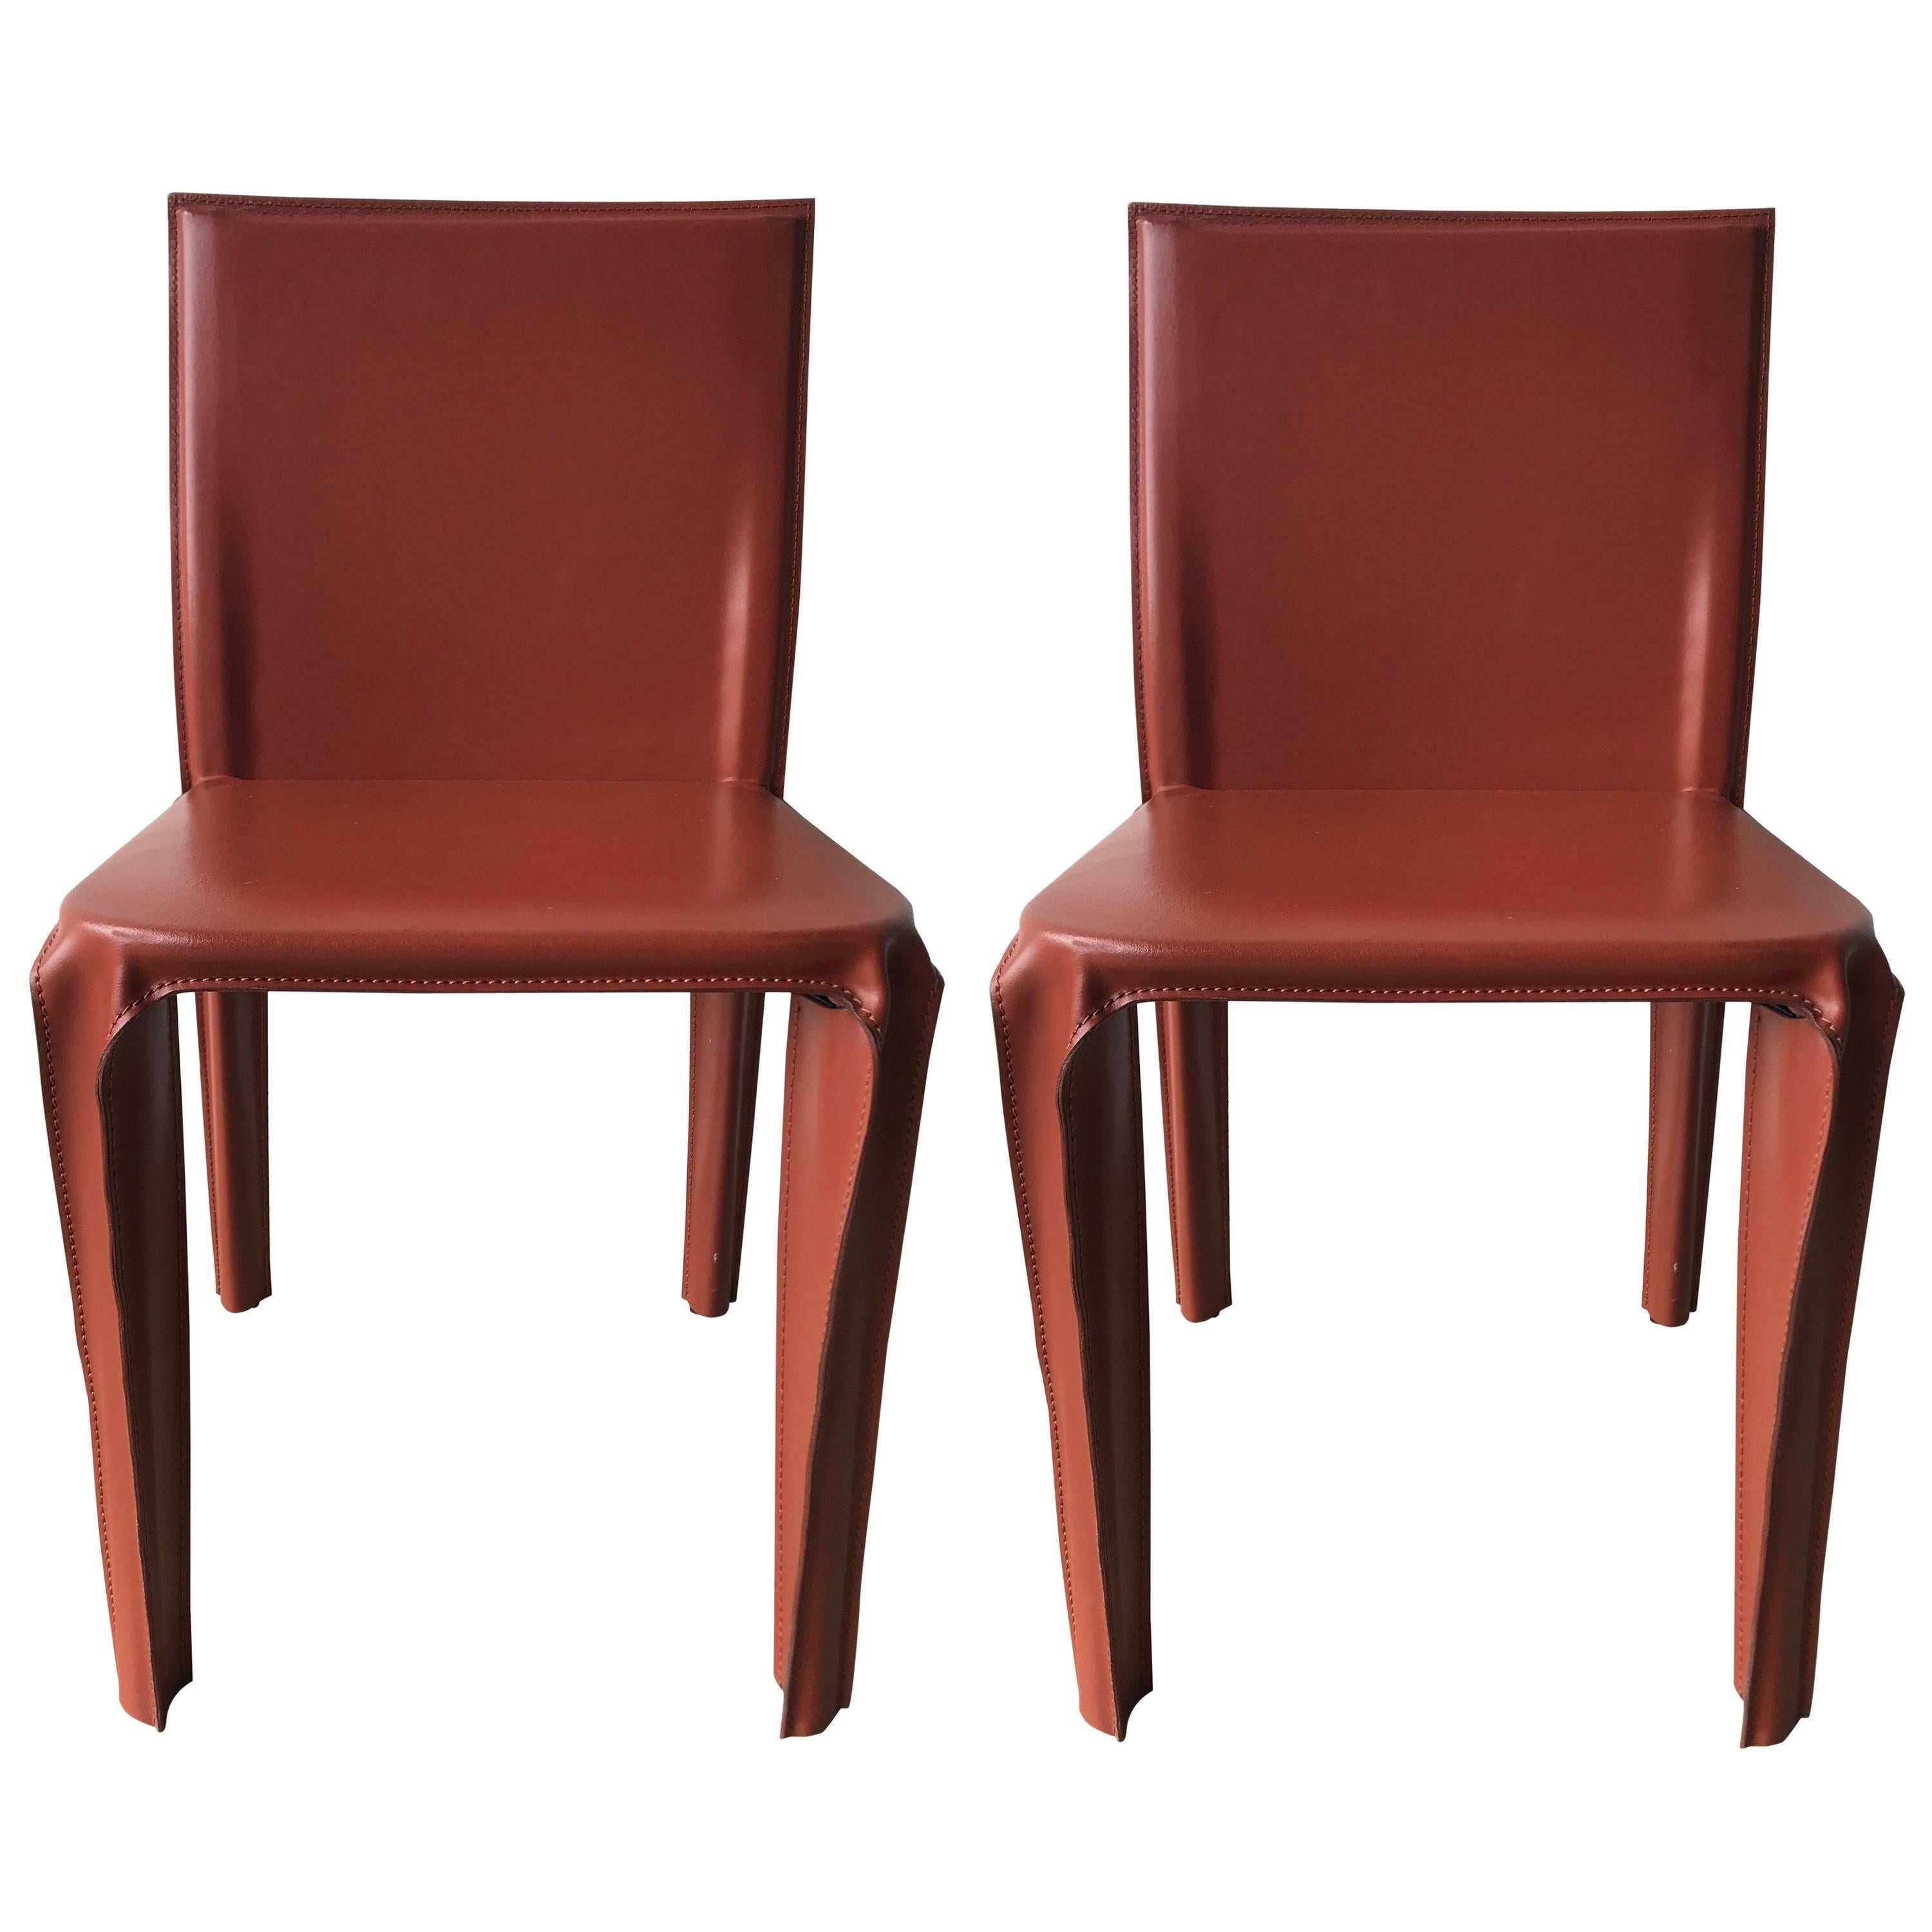 Pair of Red Leather Chairs by Arper, Italy